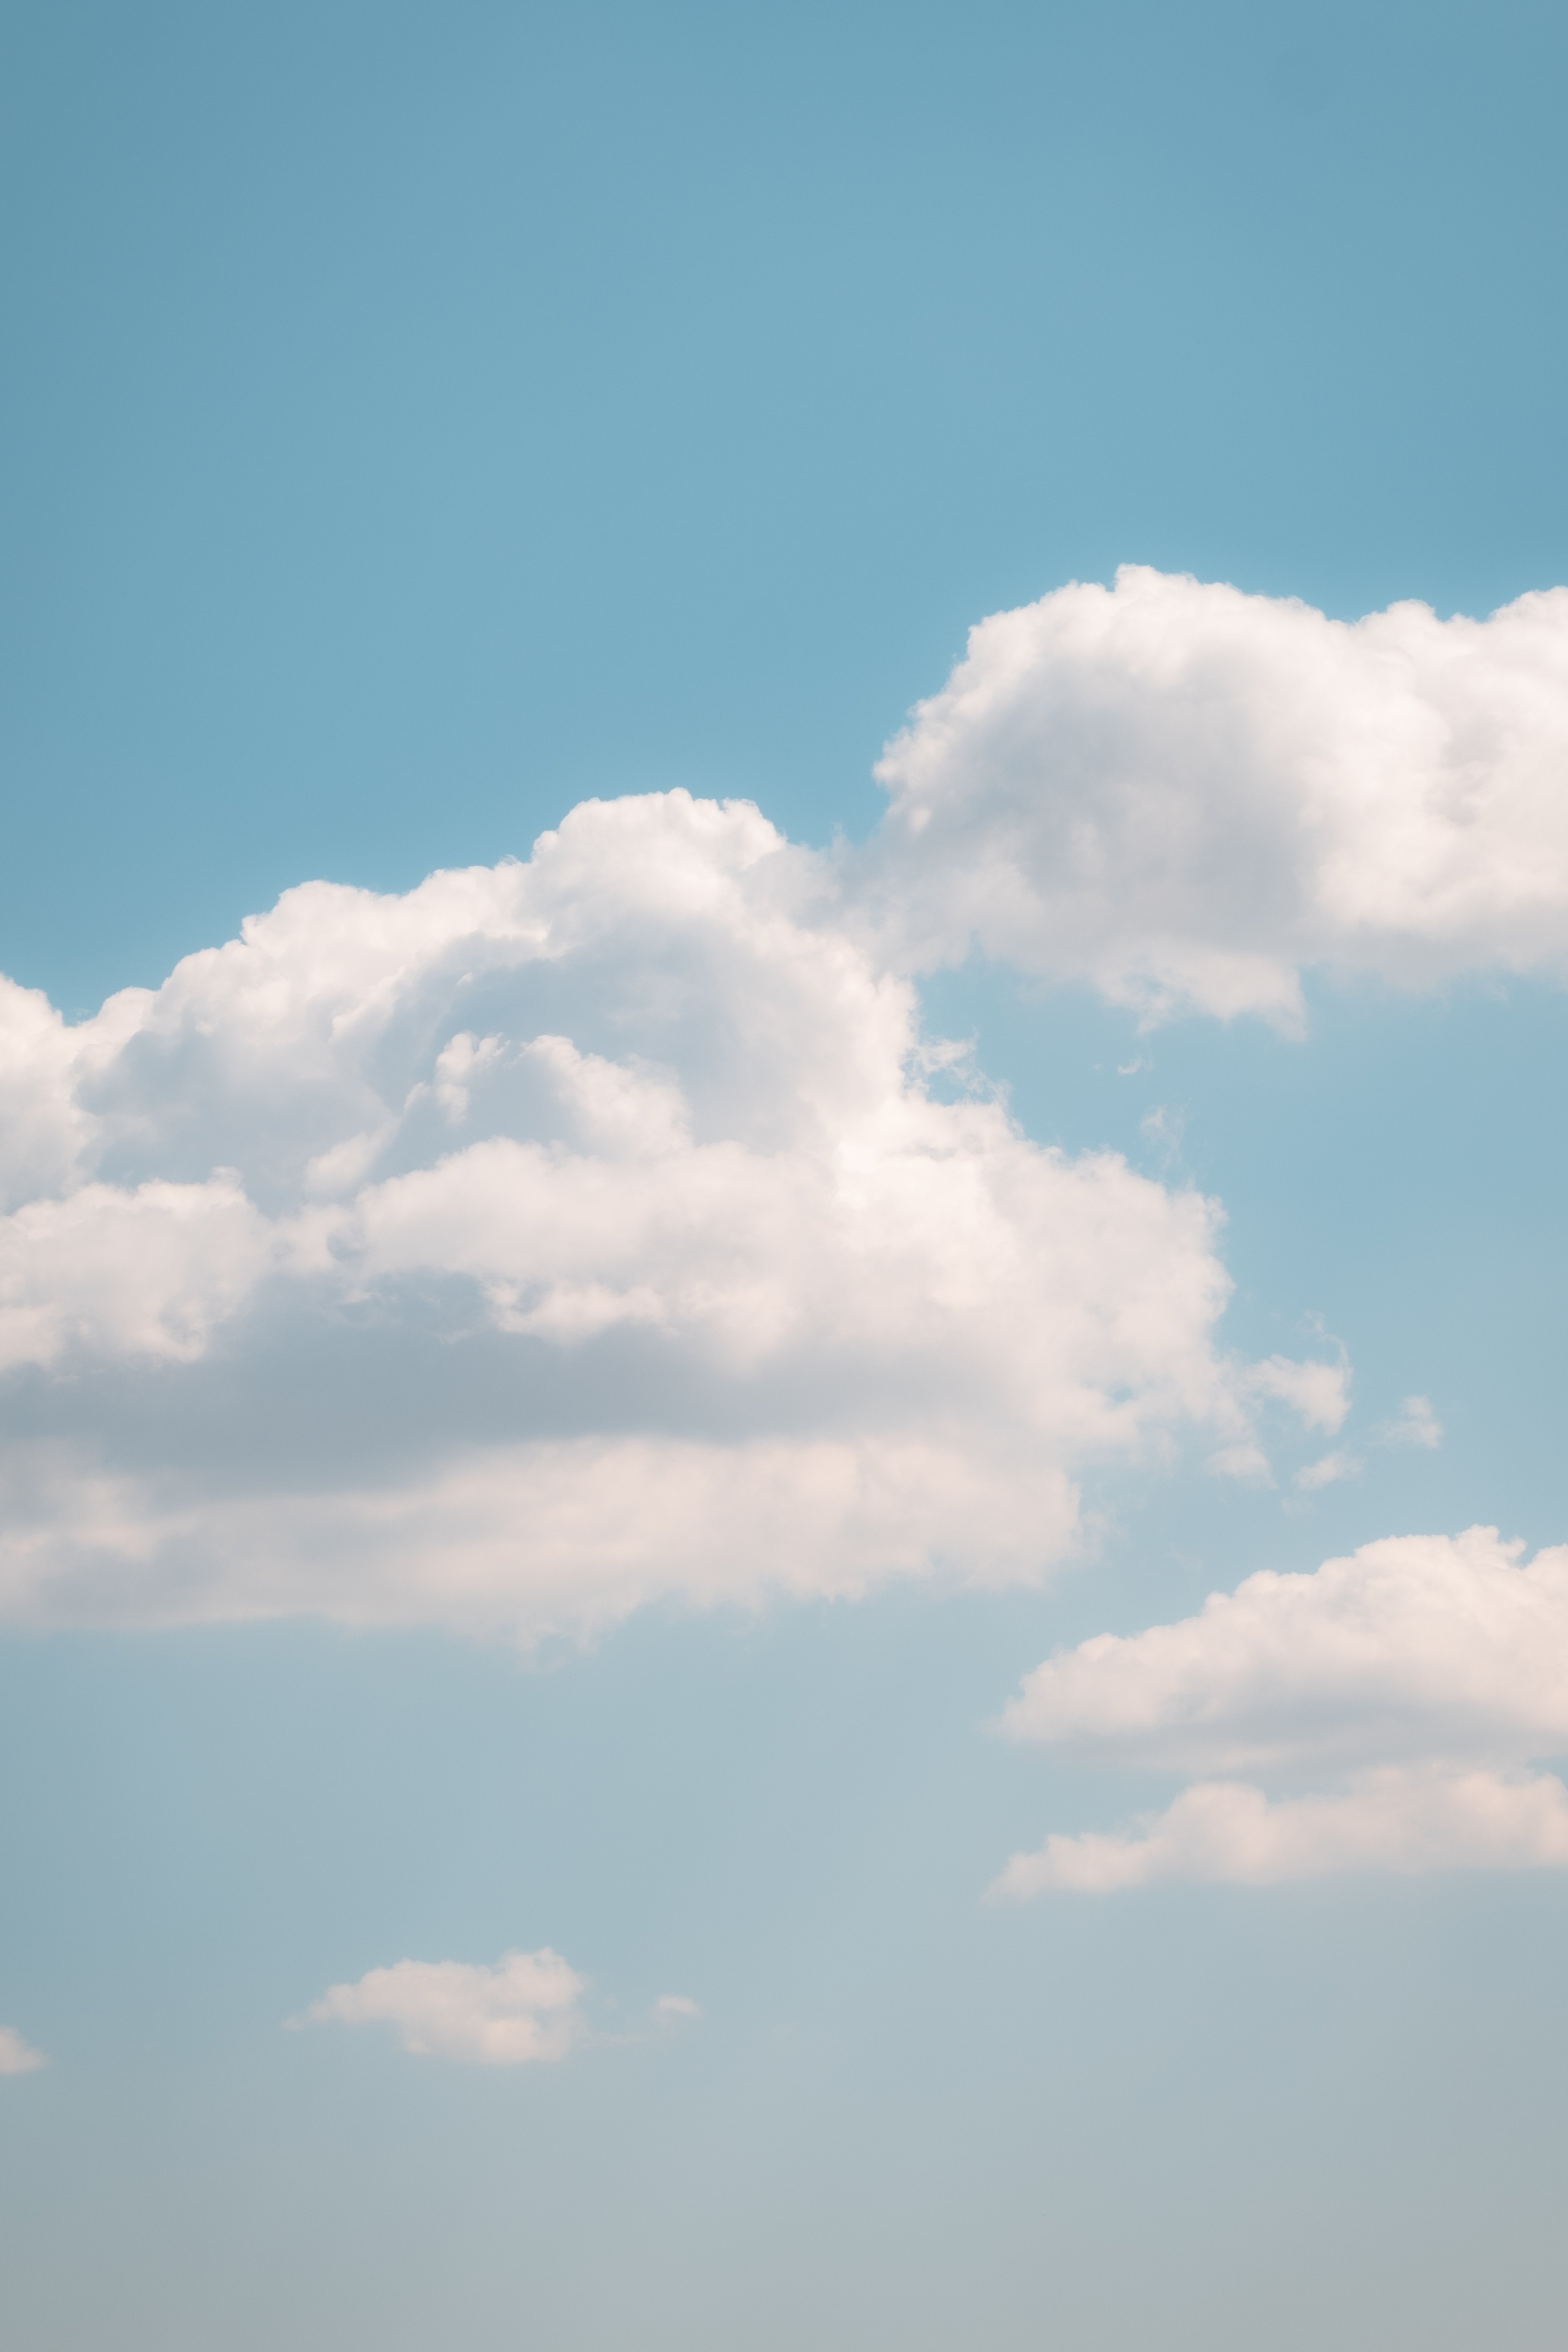 Browse Free HD Images of White Clouds In A Soft Blue Sky On Warm Summer Day